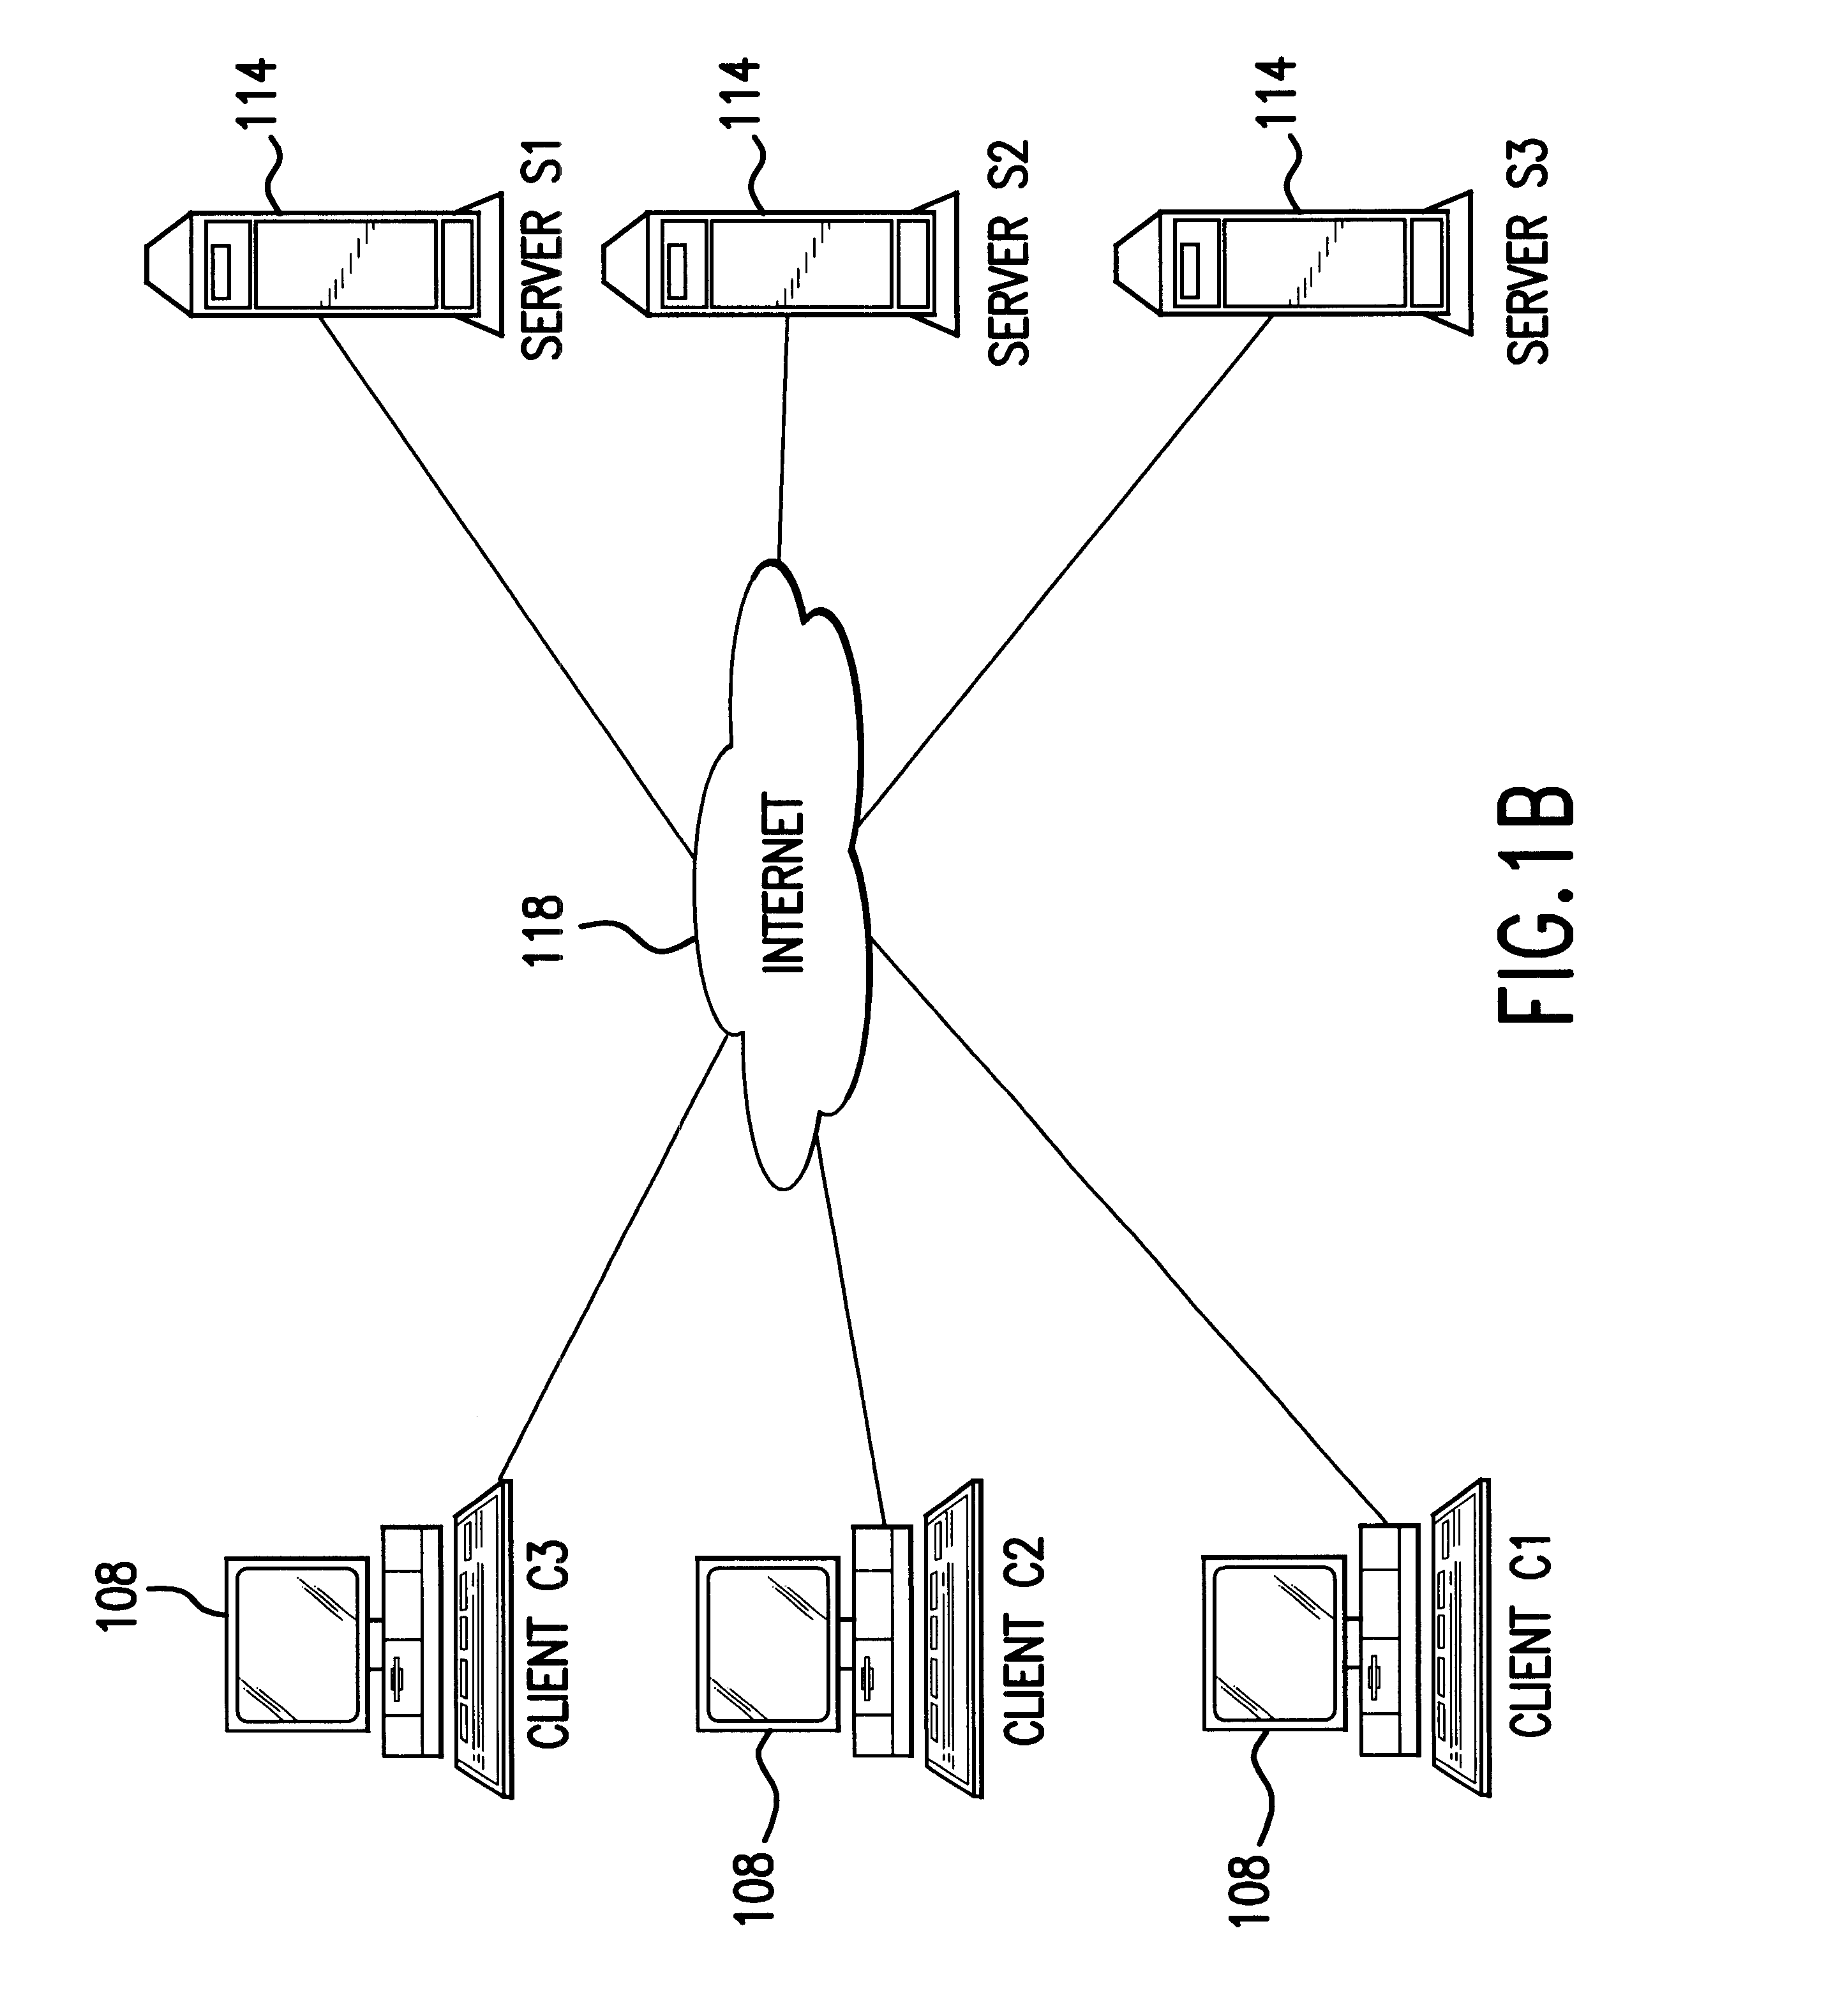 System, method, and apparatus for automatically and dynamically updating options, features, and/or services available to a client device